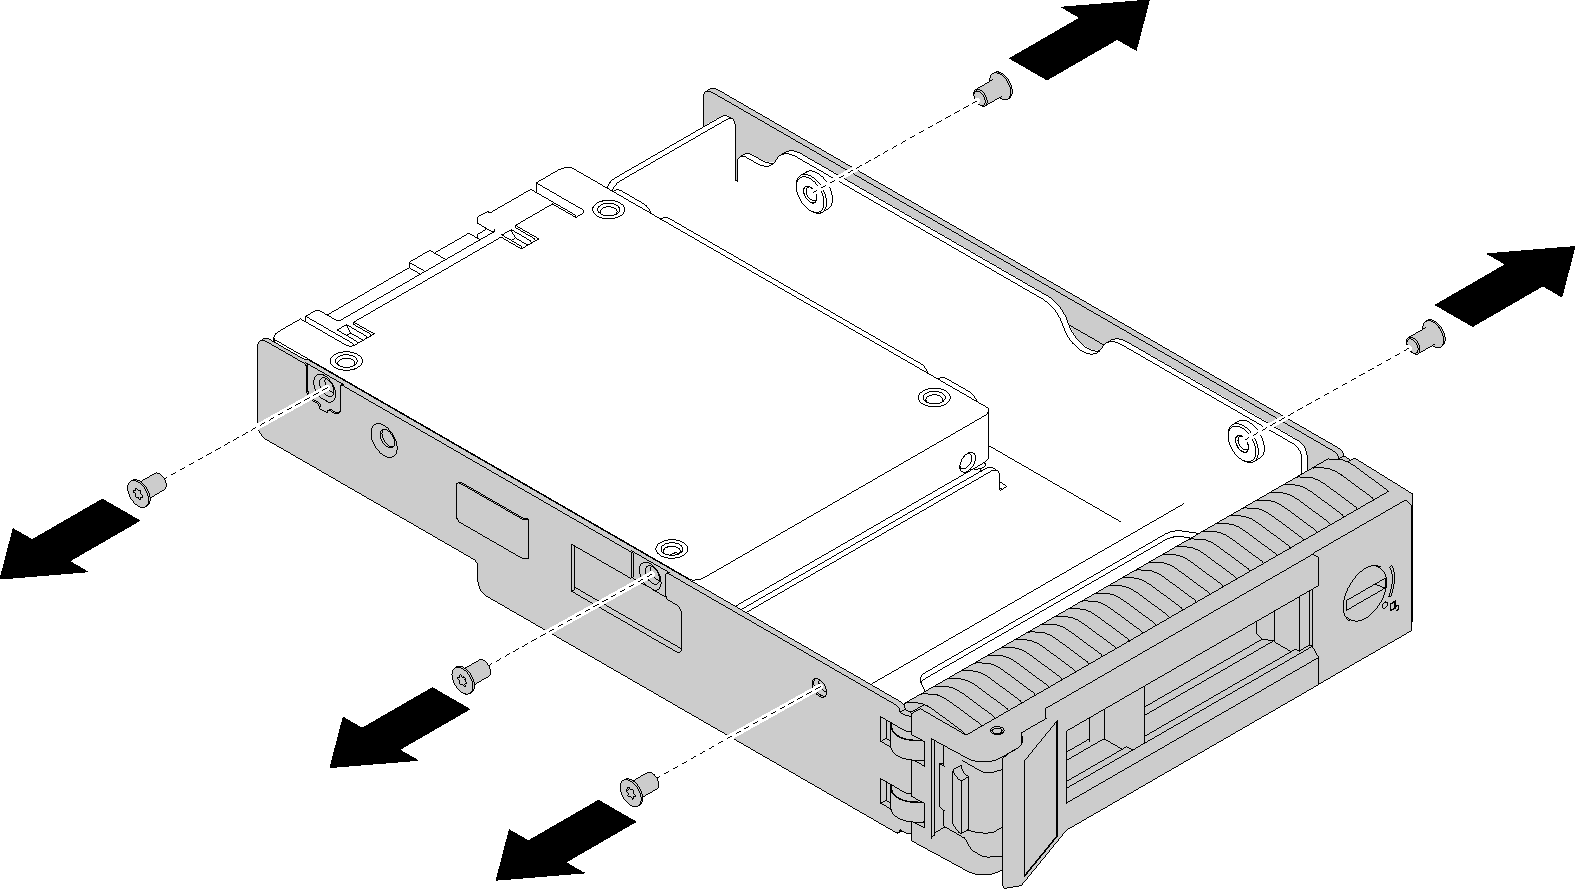 Removing the screws that secure the 2.5-inch SSD and the drive adapter